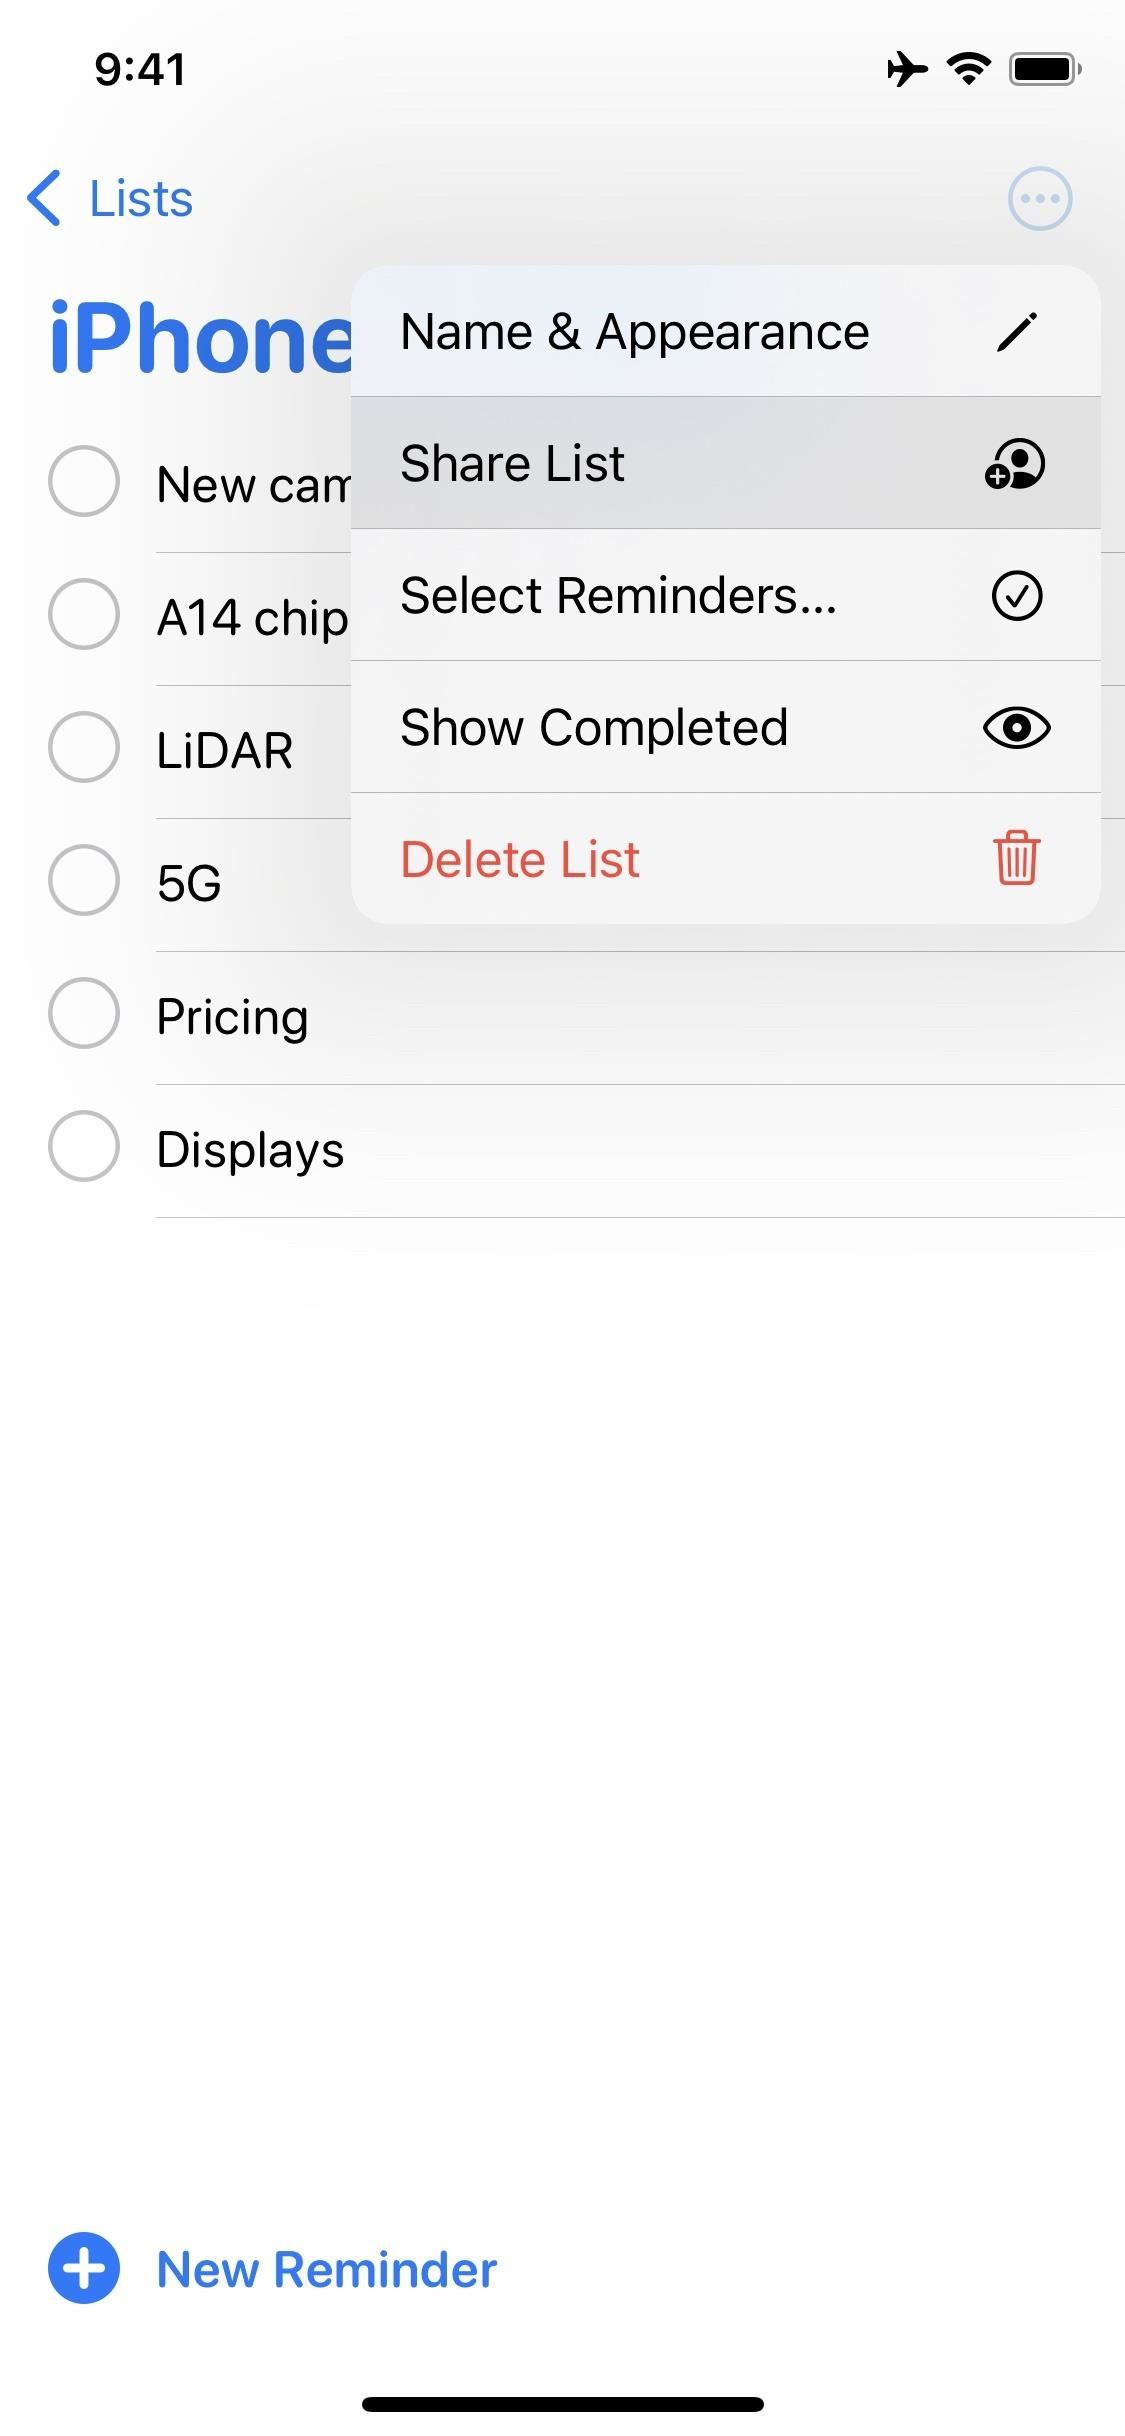 Reminders Lets You Assign Tasks to Users You Shared the List with — Here's How It Works in iOS 14